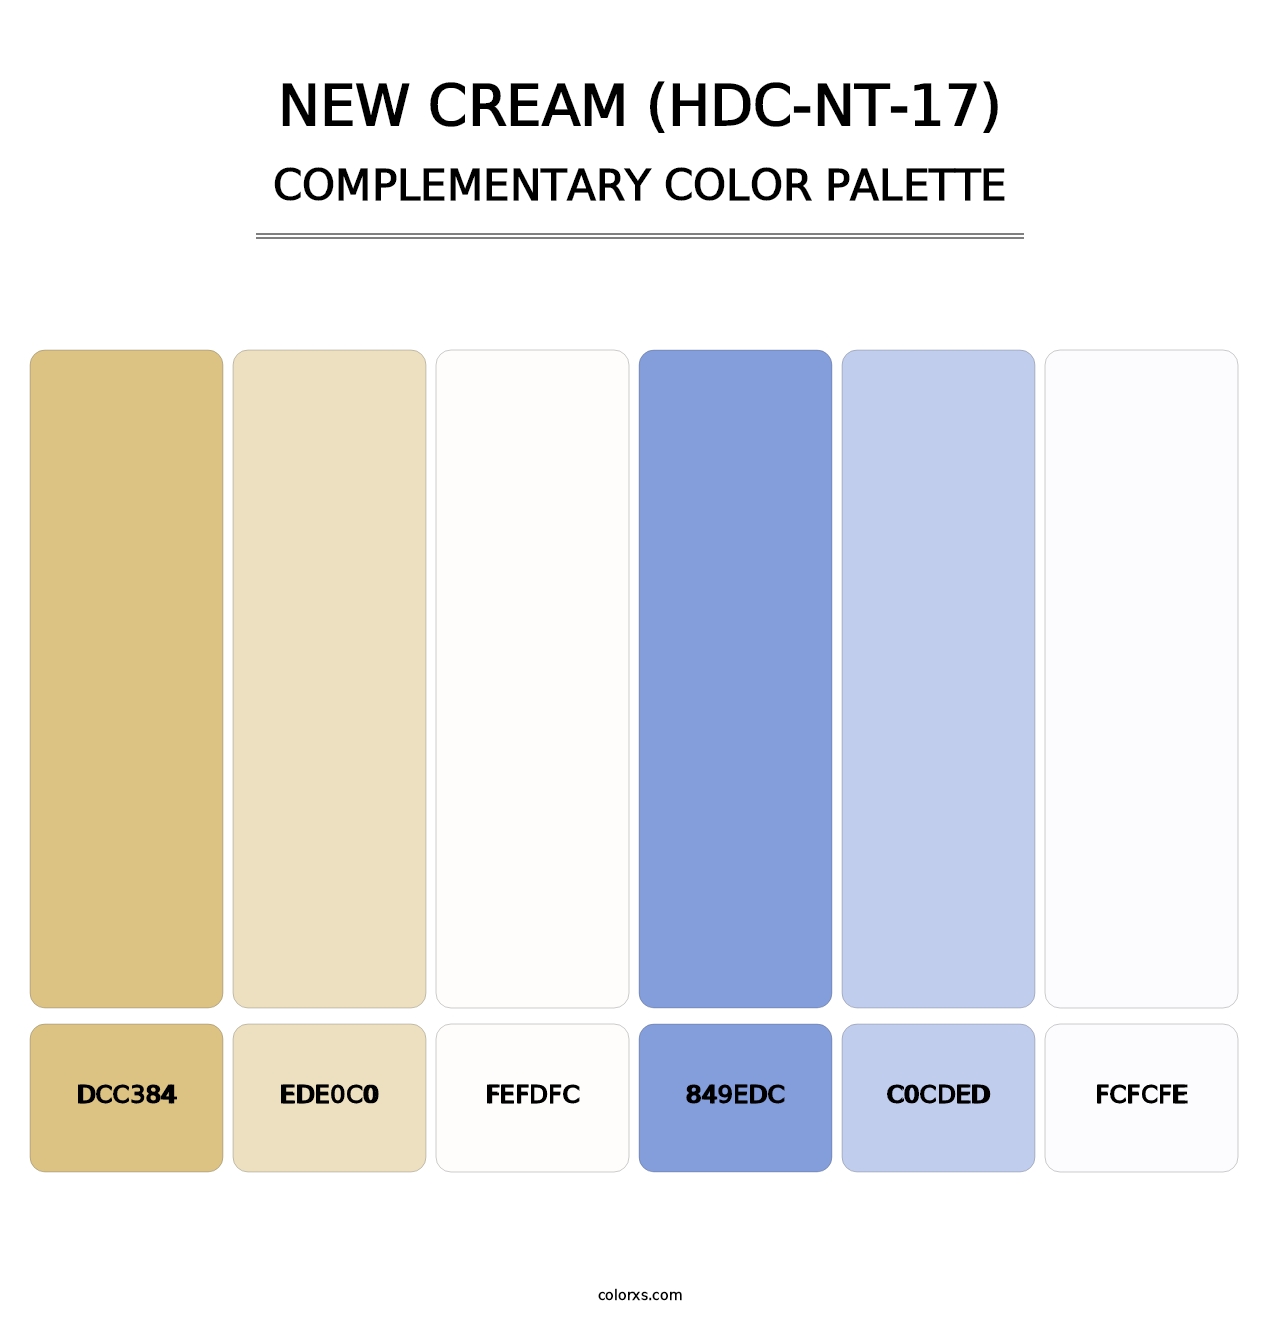 New Cream (HDC-NT-17) - Complementary Color Palette